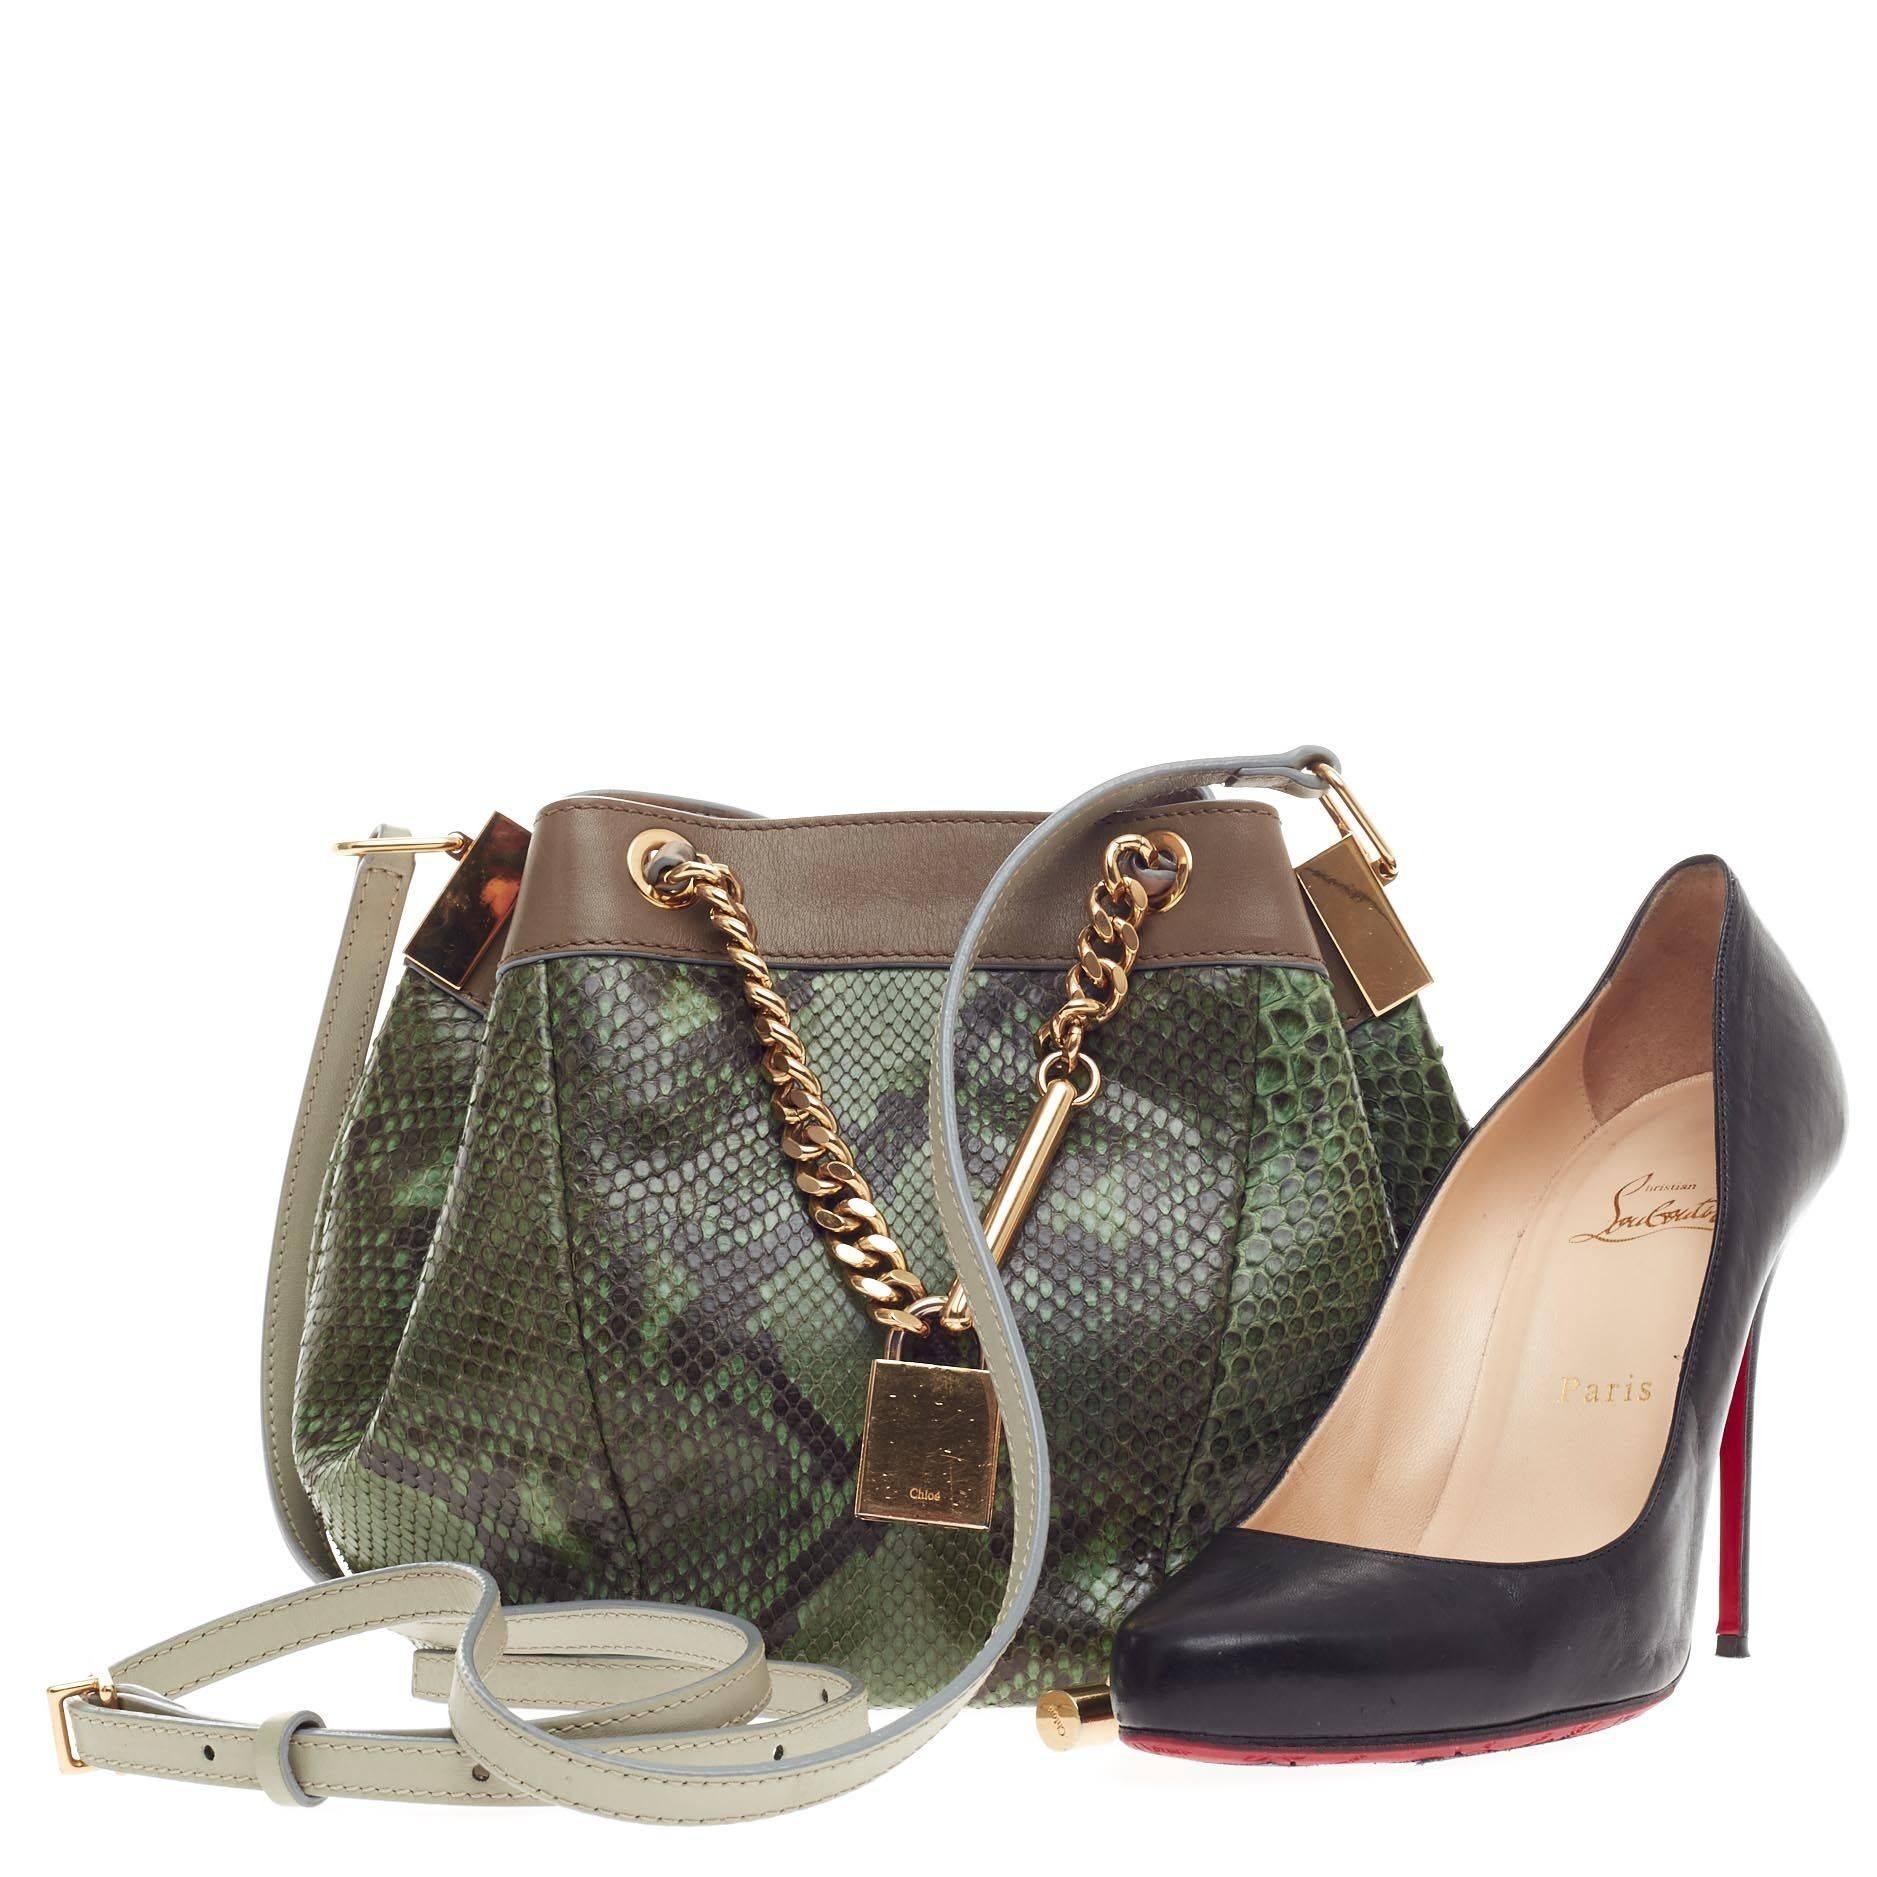 This authentic Chloe Camille Crossbody Python Small presented in the brand's Spring/Summer 2014 Collection showcases modern luxury with its innovative and youthful design. Exquisitely made from genuine forest green python skin, this petite crossbody